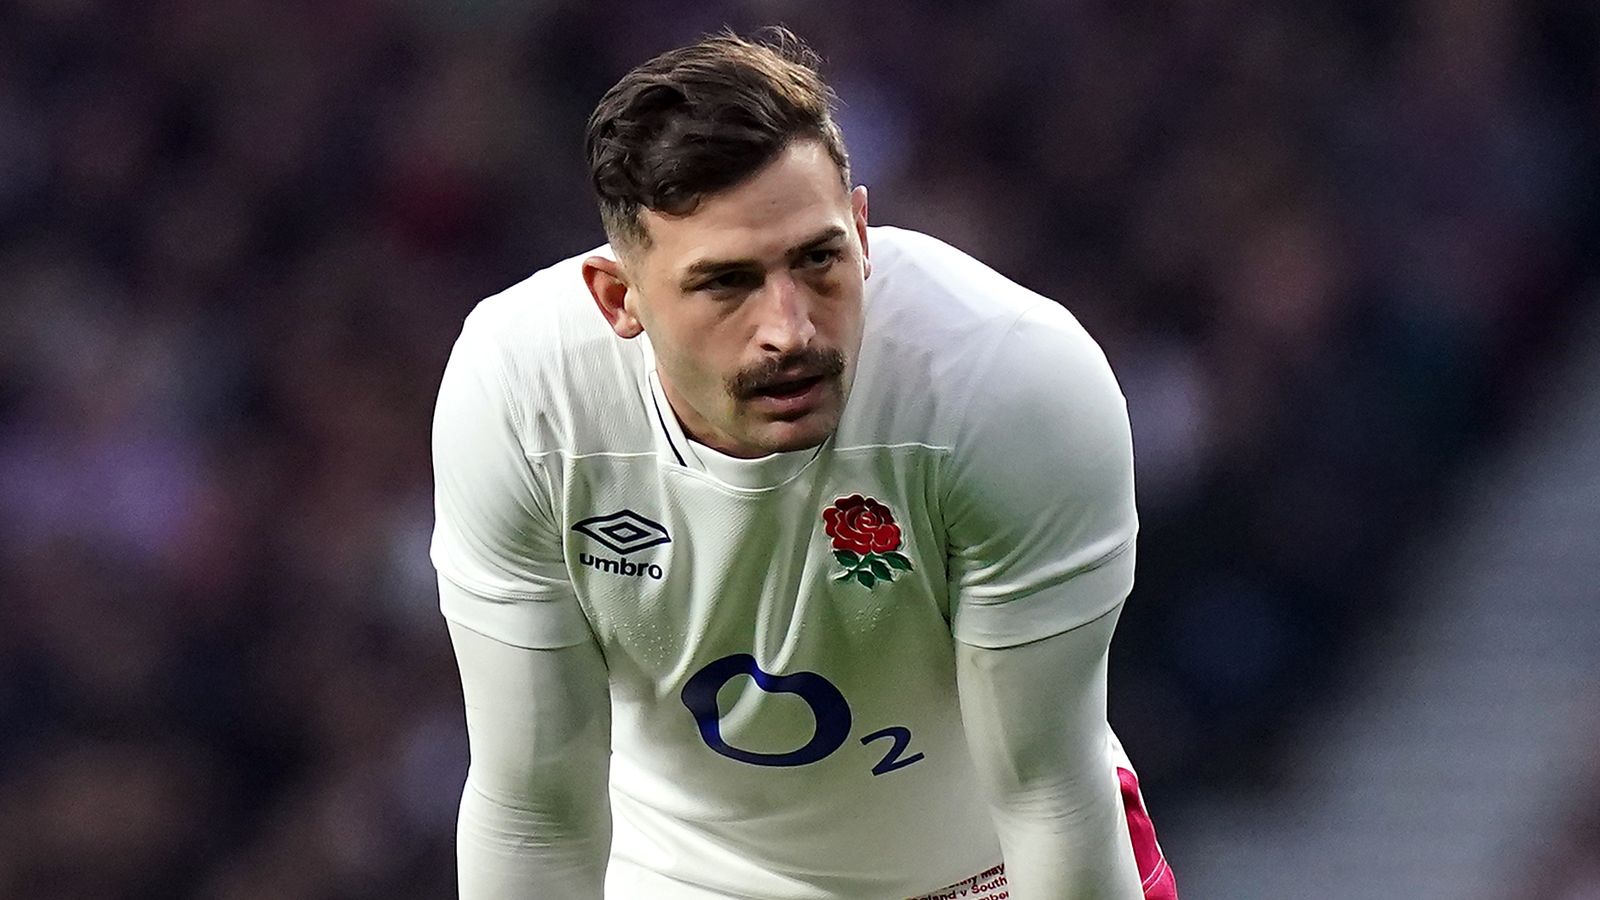 England’s Jonny May expresses concern for Premiership players’ futures as ‘rugby is not football’